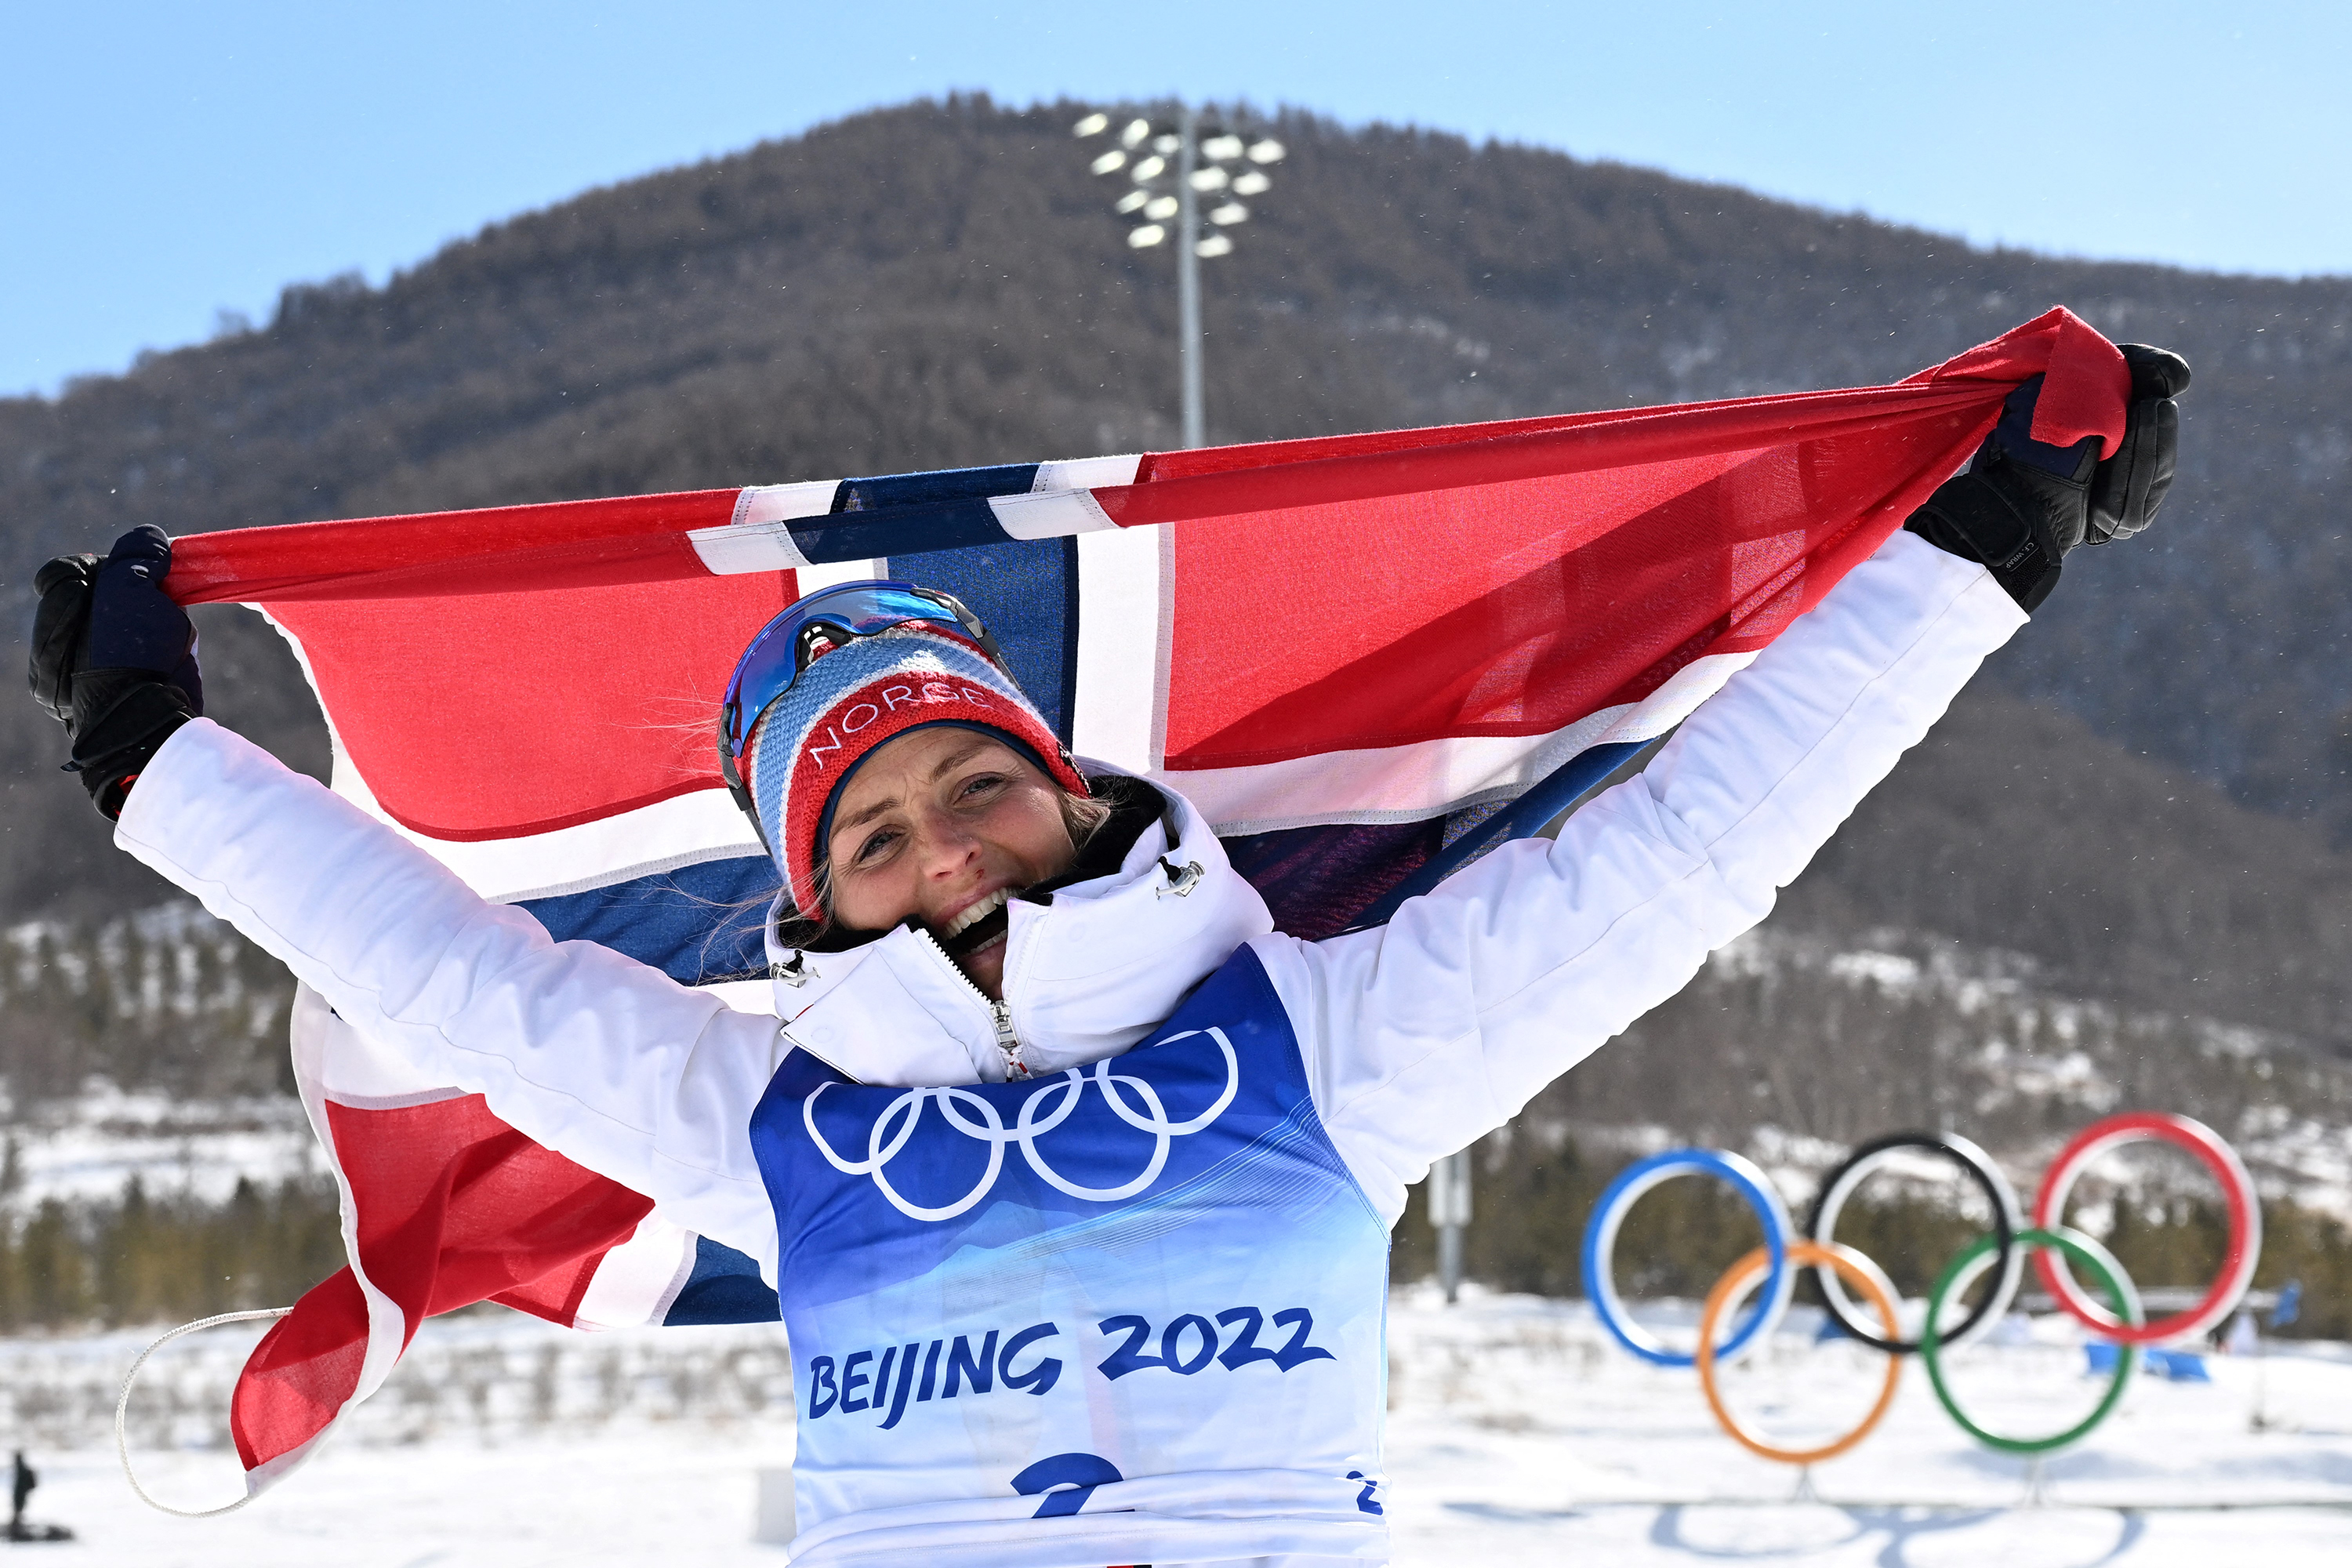 Norway's Therese Johaug wins three gold medals at the Beijing 2022 Winter Olympics.